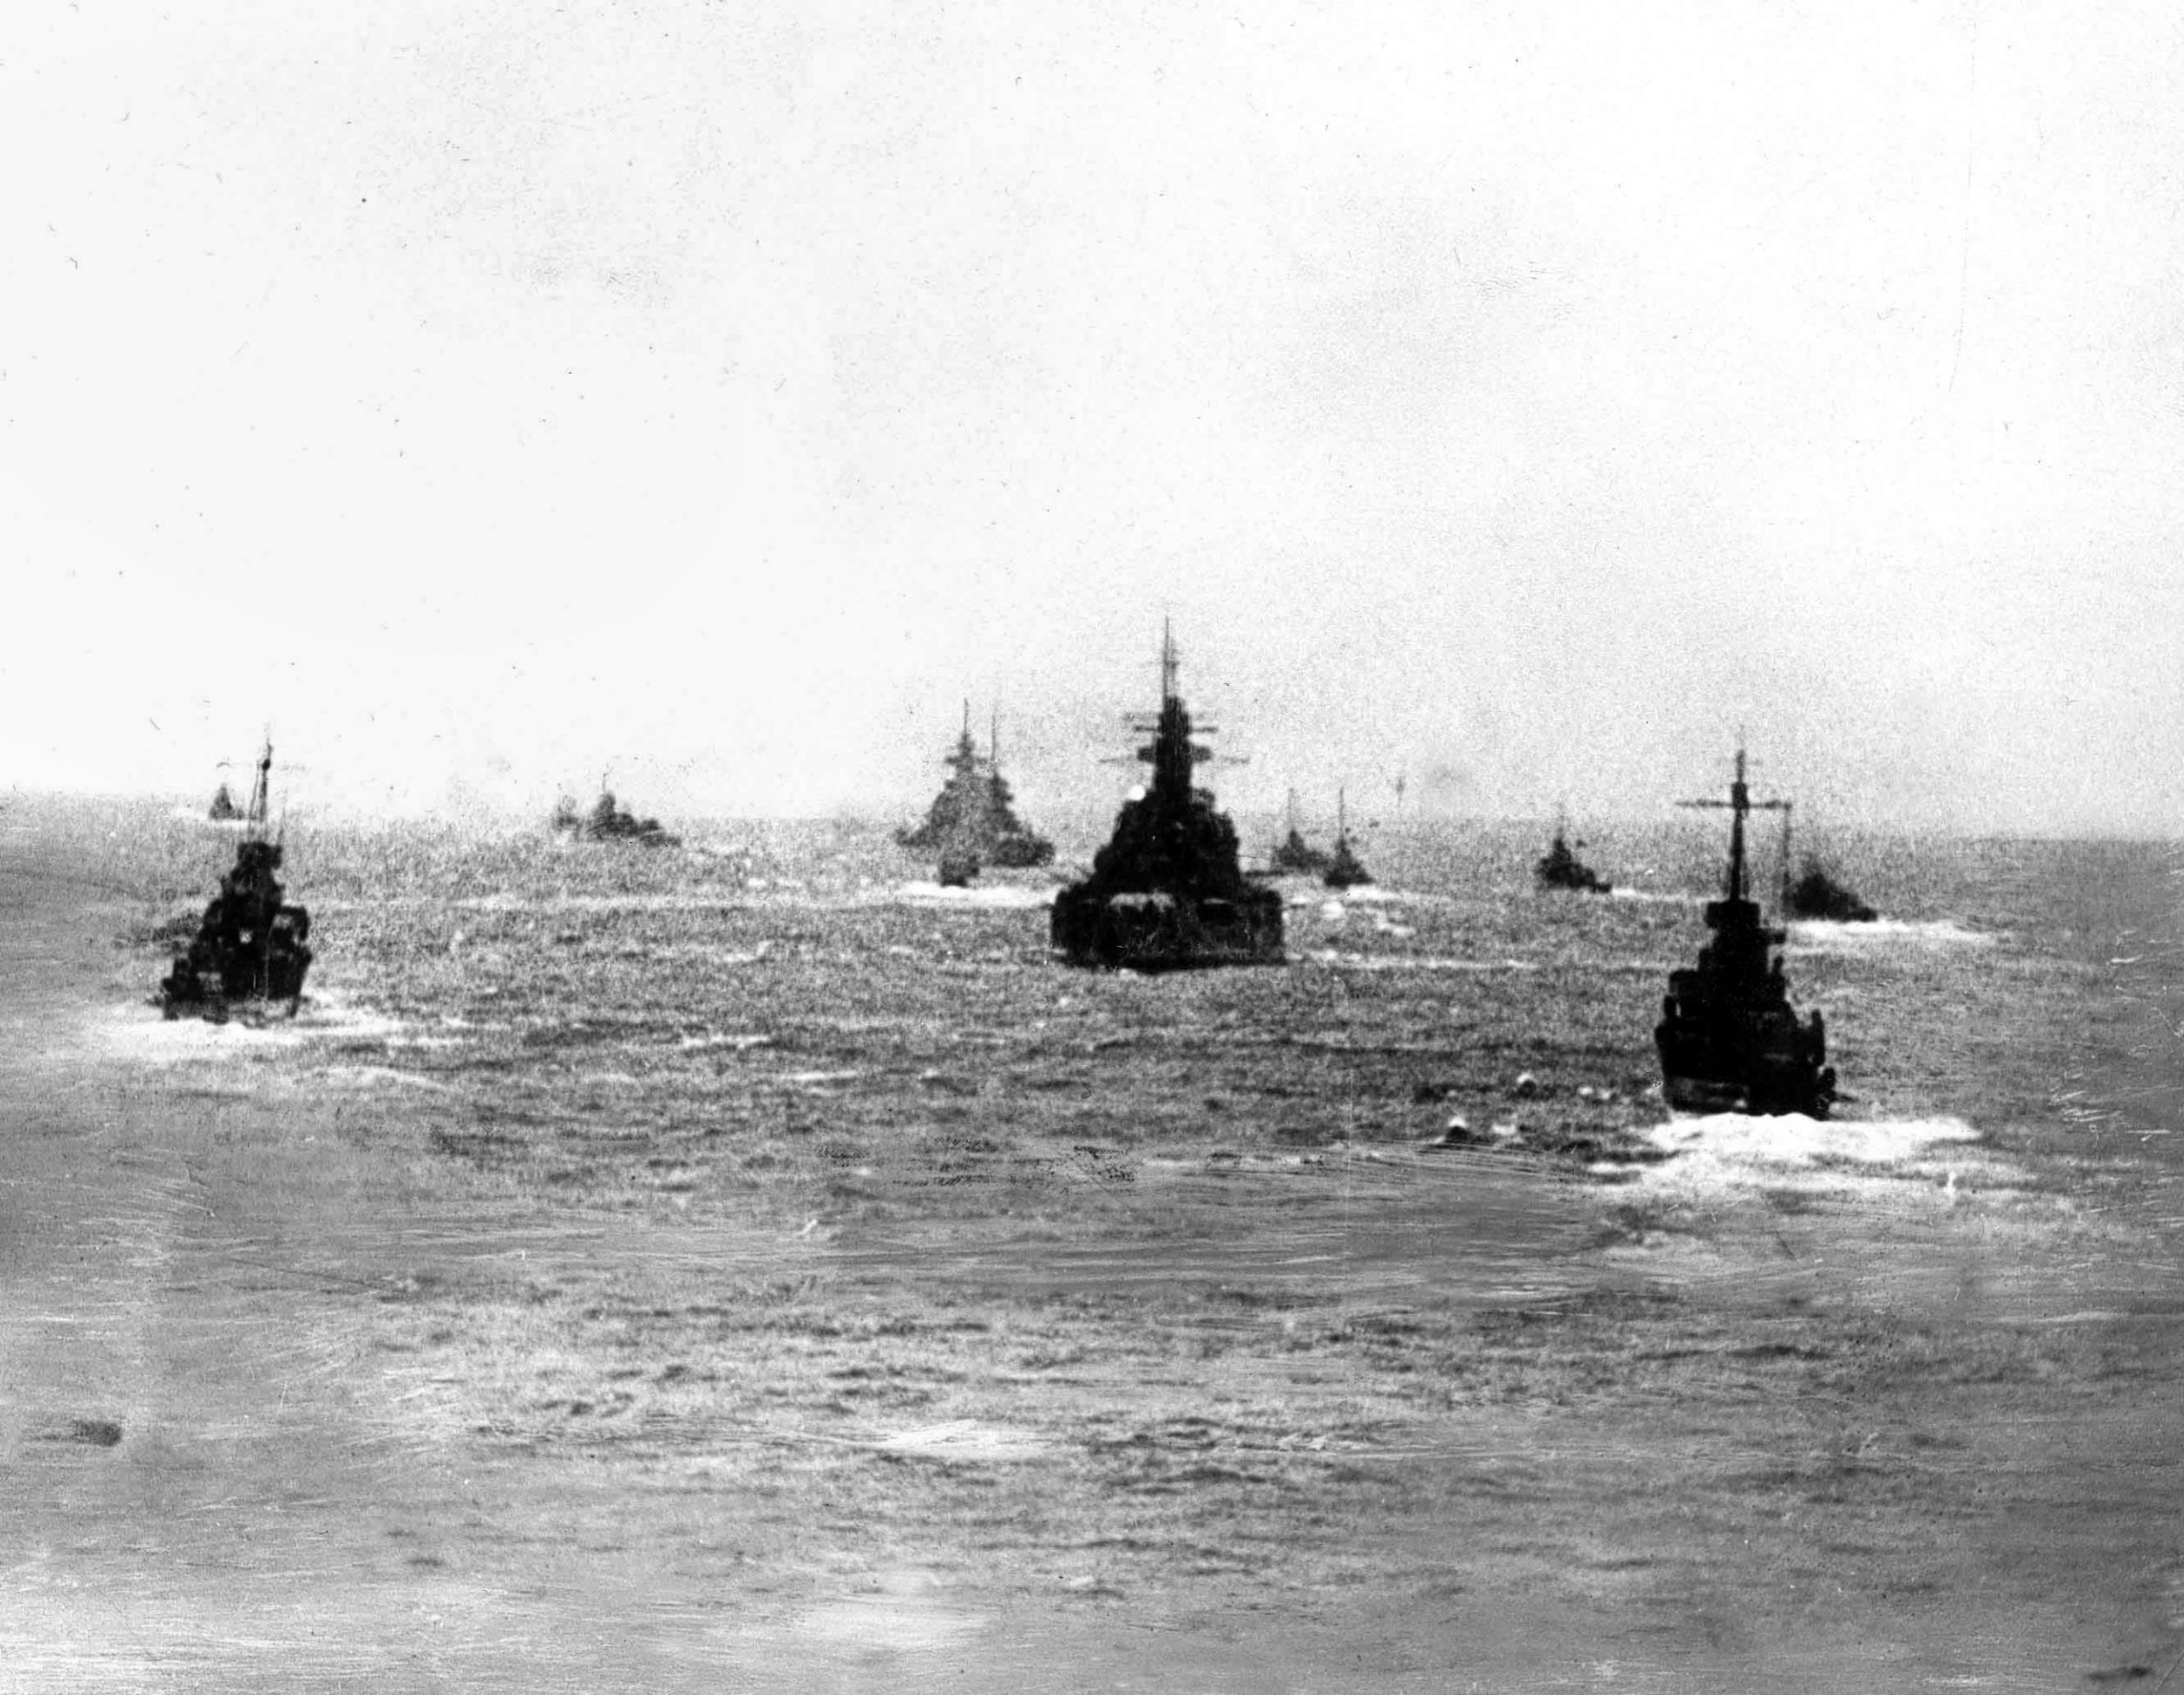 During Operation Cerberus, the battlecruisers Scharnhorst and Gneisenau and the heavy cruiser Prinz Eugen transit the English Channel with surface escorts and air cover. British attempts to disrupt the “Channel Dash” were an exercise in futility. 